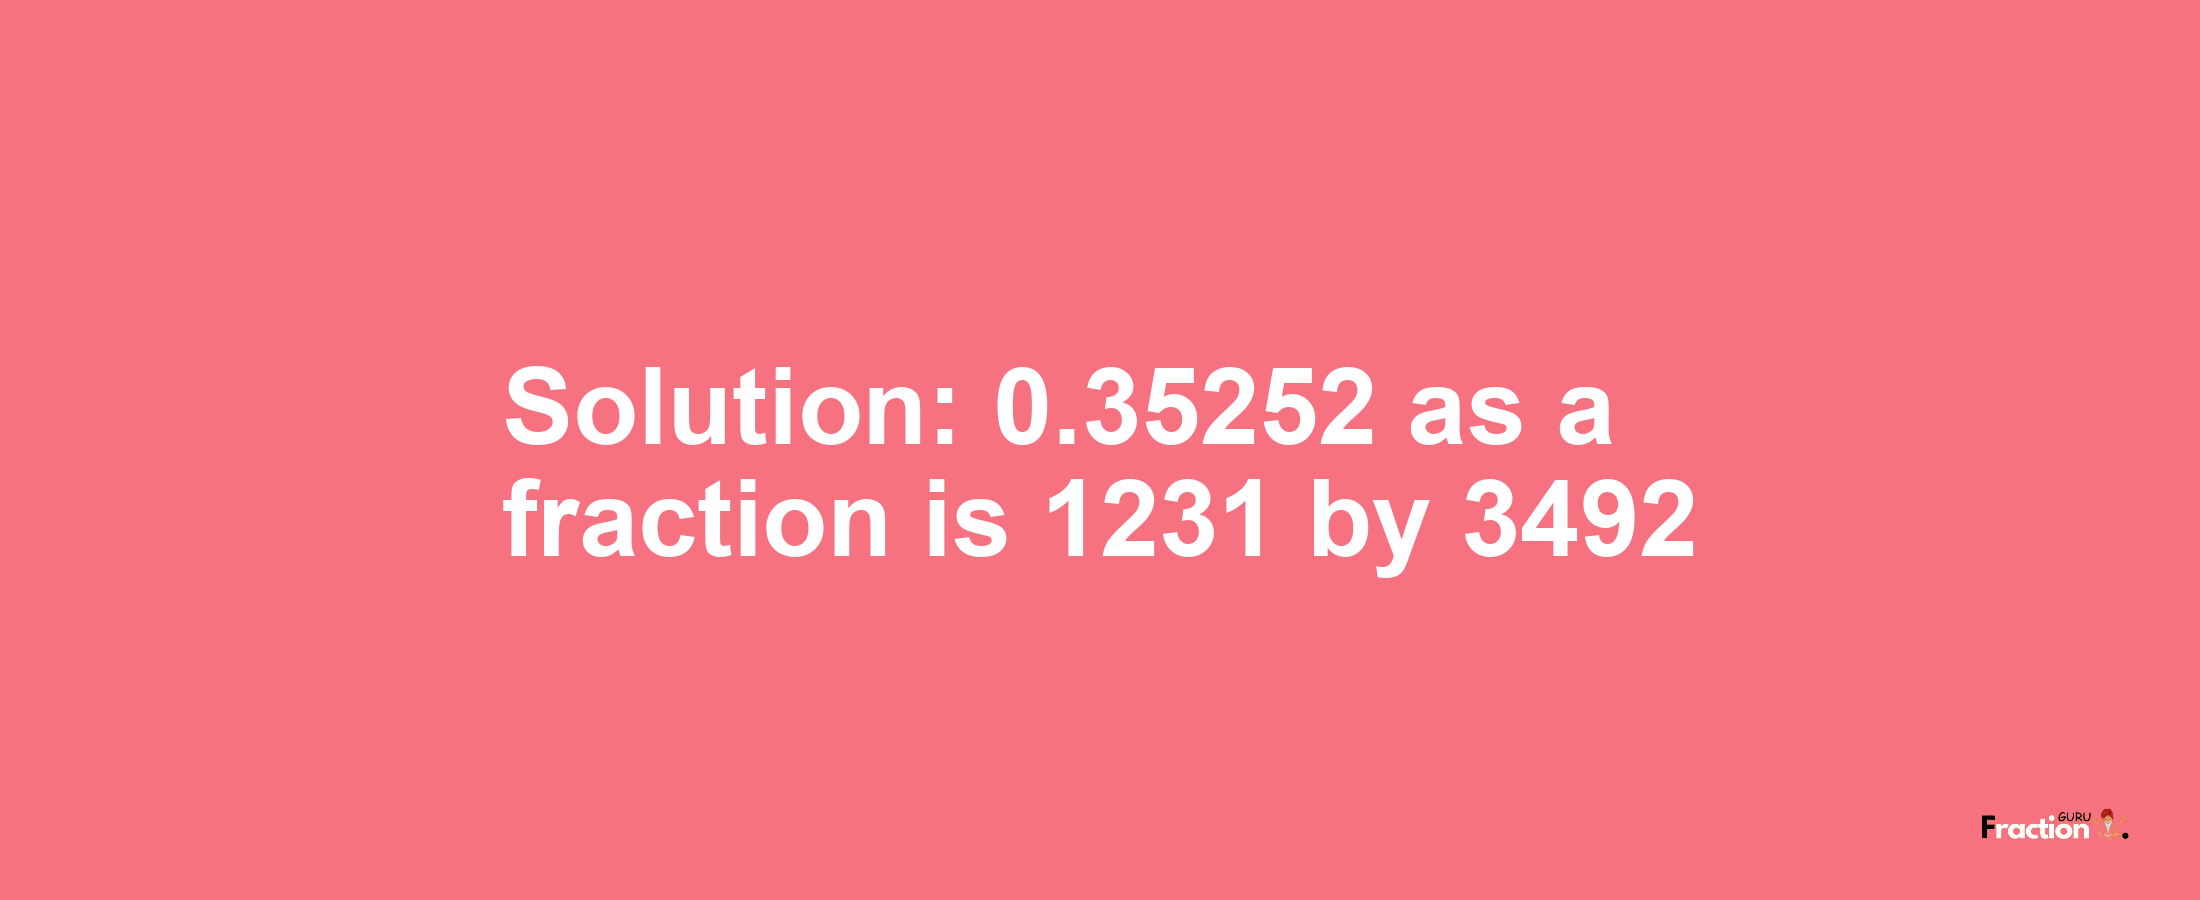 Solution:0.35252 as a fraction is 1231/3492